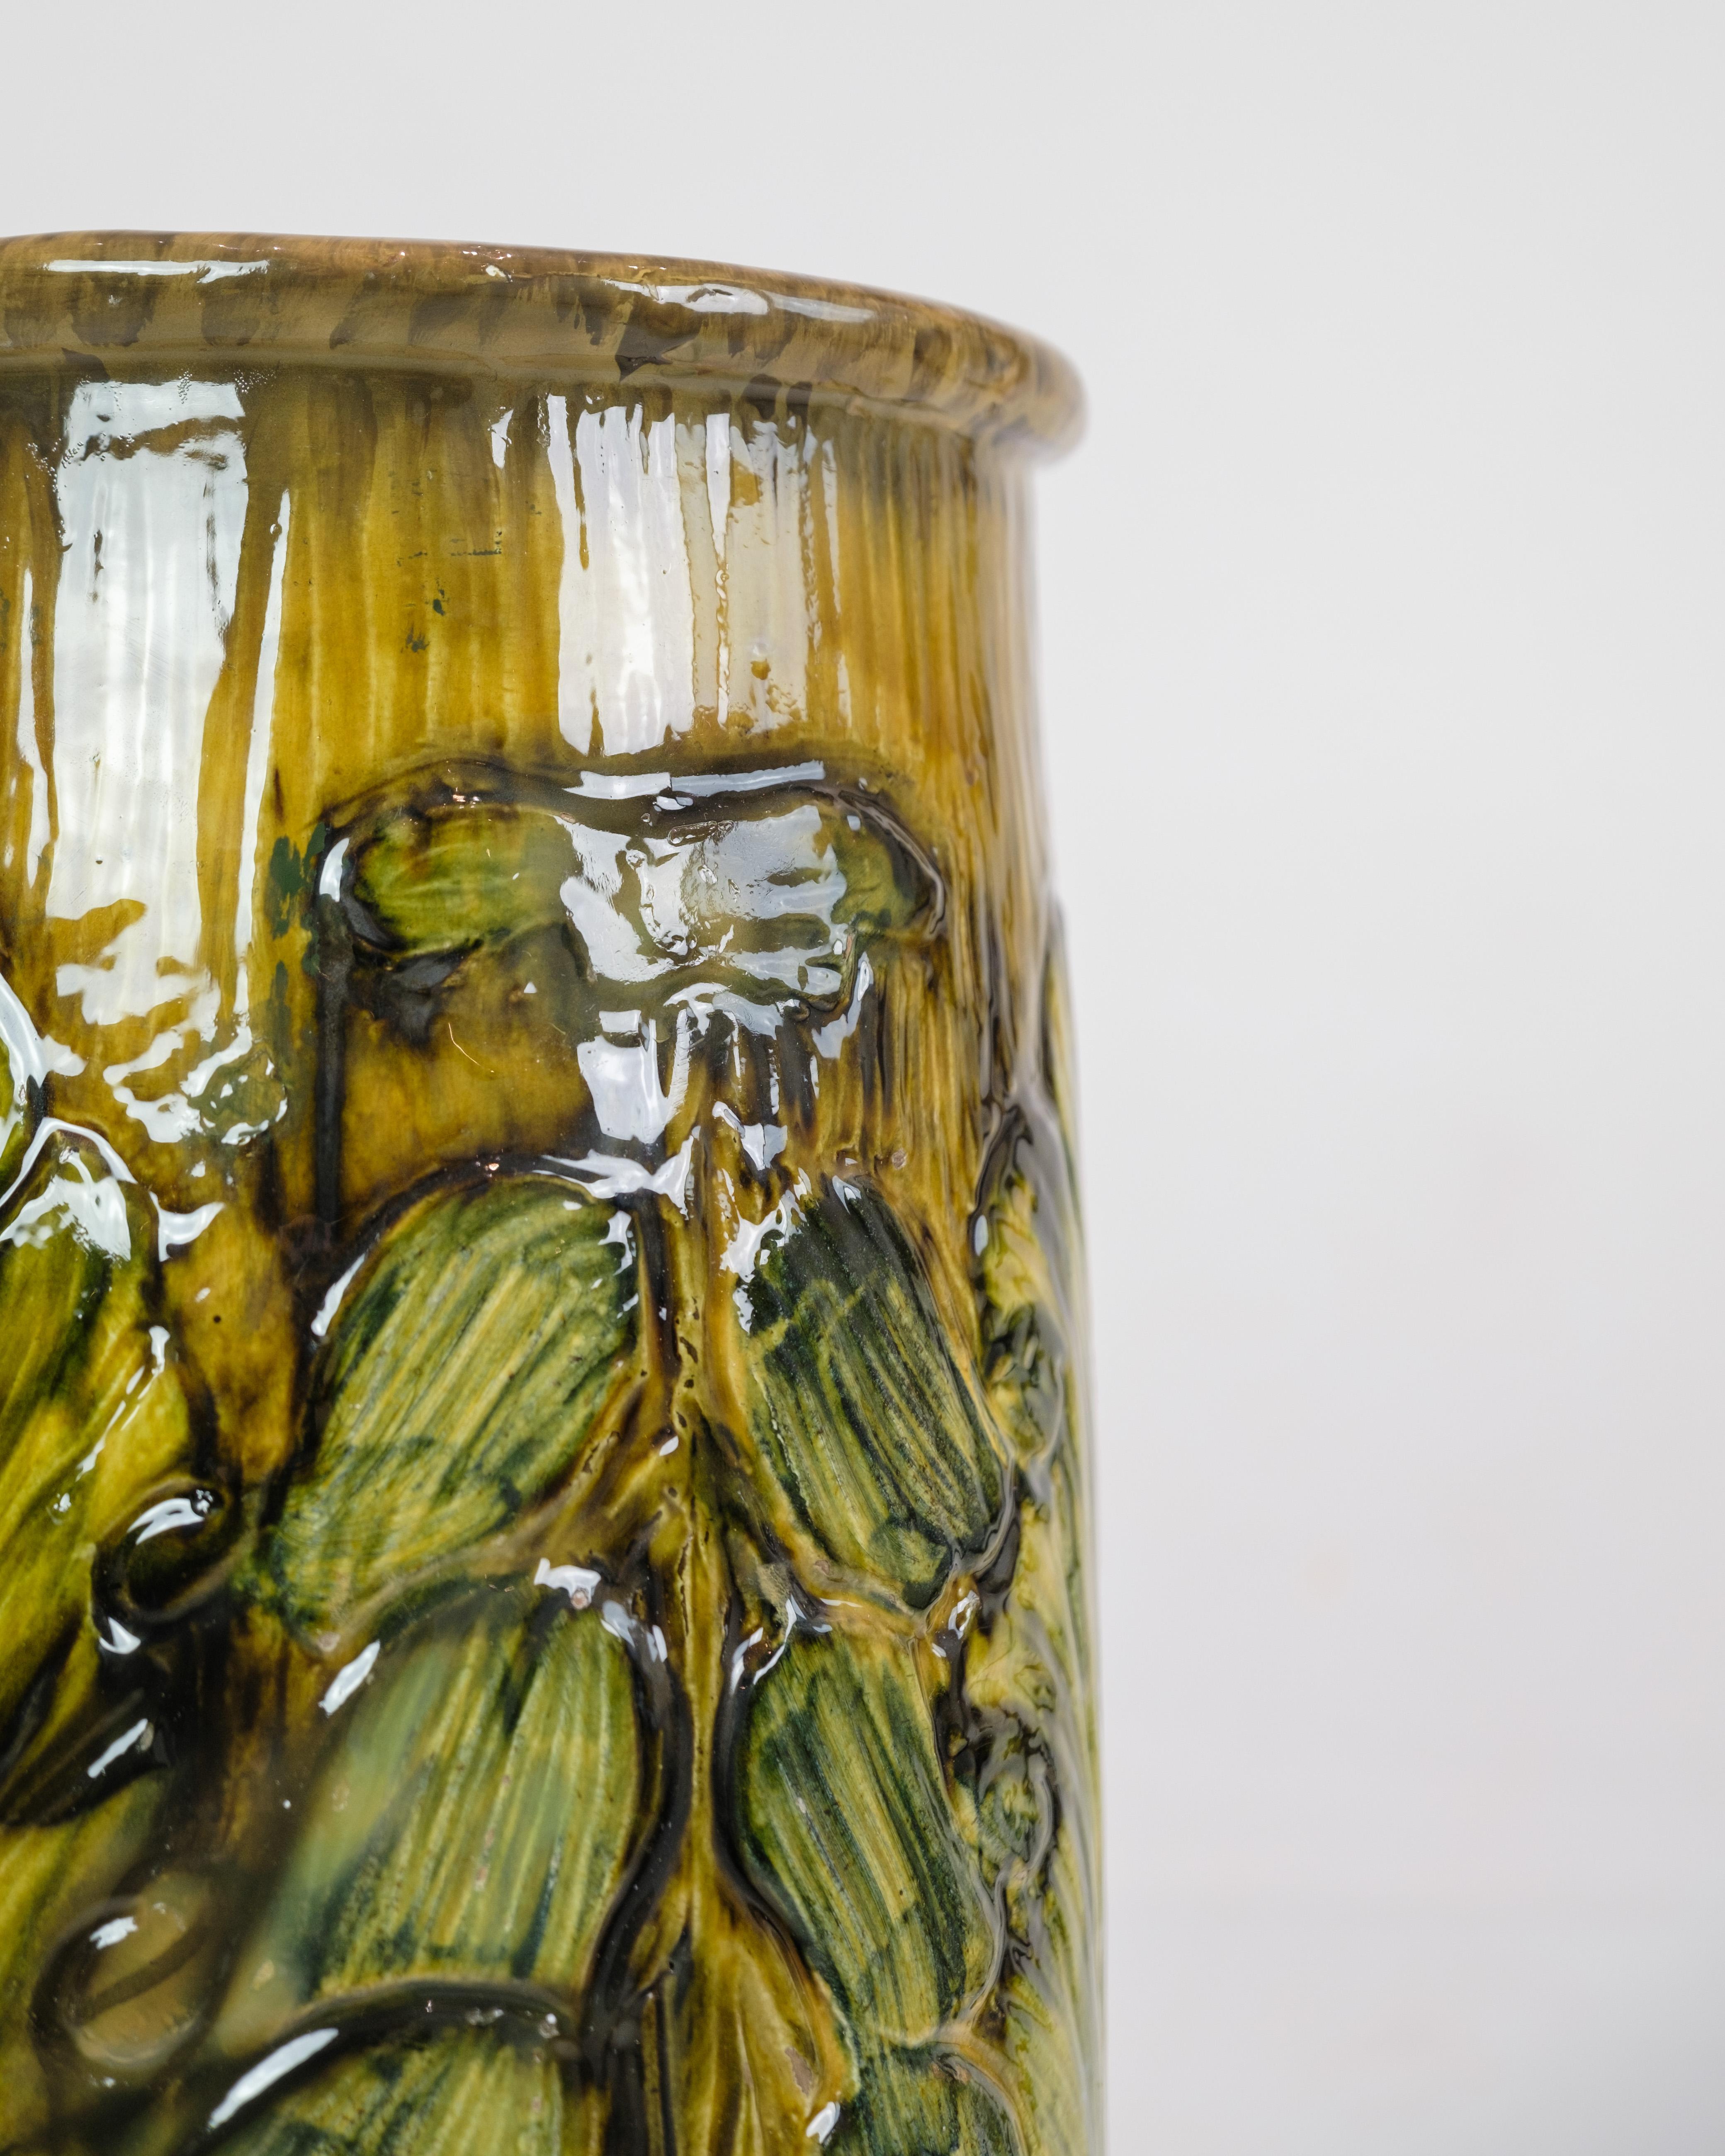 This large floor vase in Danico ceramics is a remarkable piece from around the 1960s. Vase, with its mix of yellow and greenish colors, exudes a unique and lively aesthetic characteristic of this era.

The handmade ceramic bowl is likely to have an